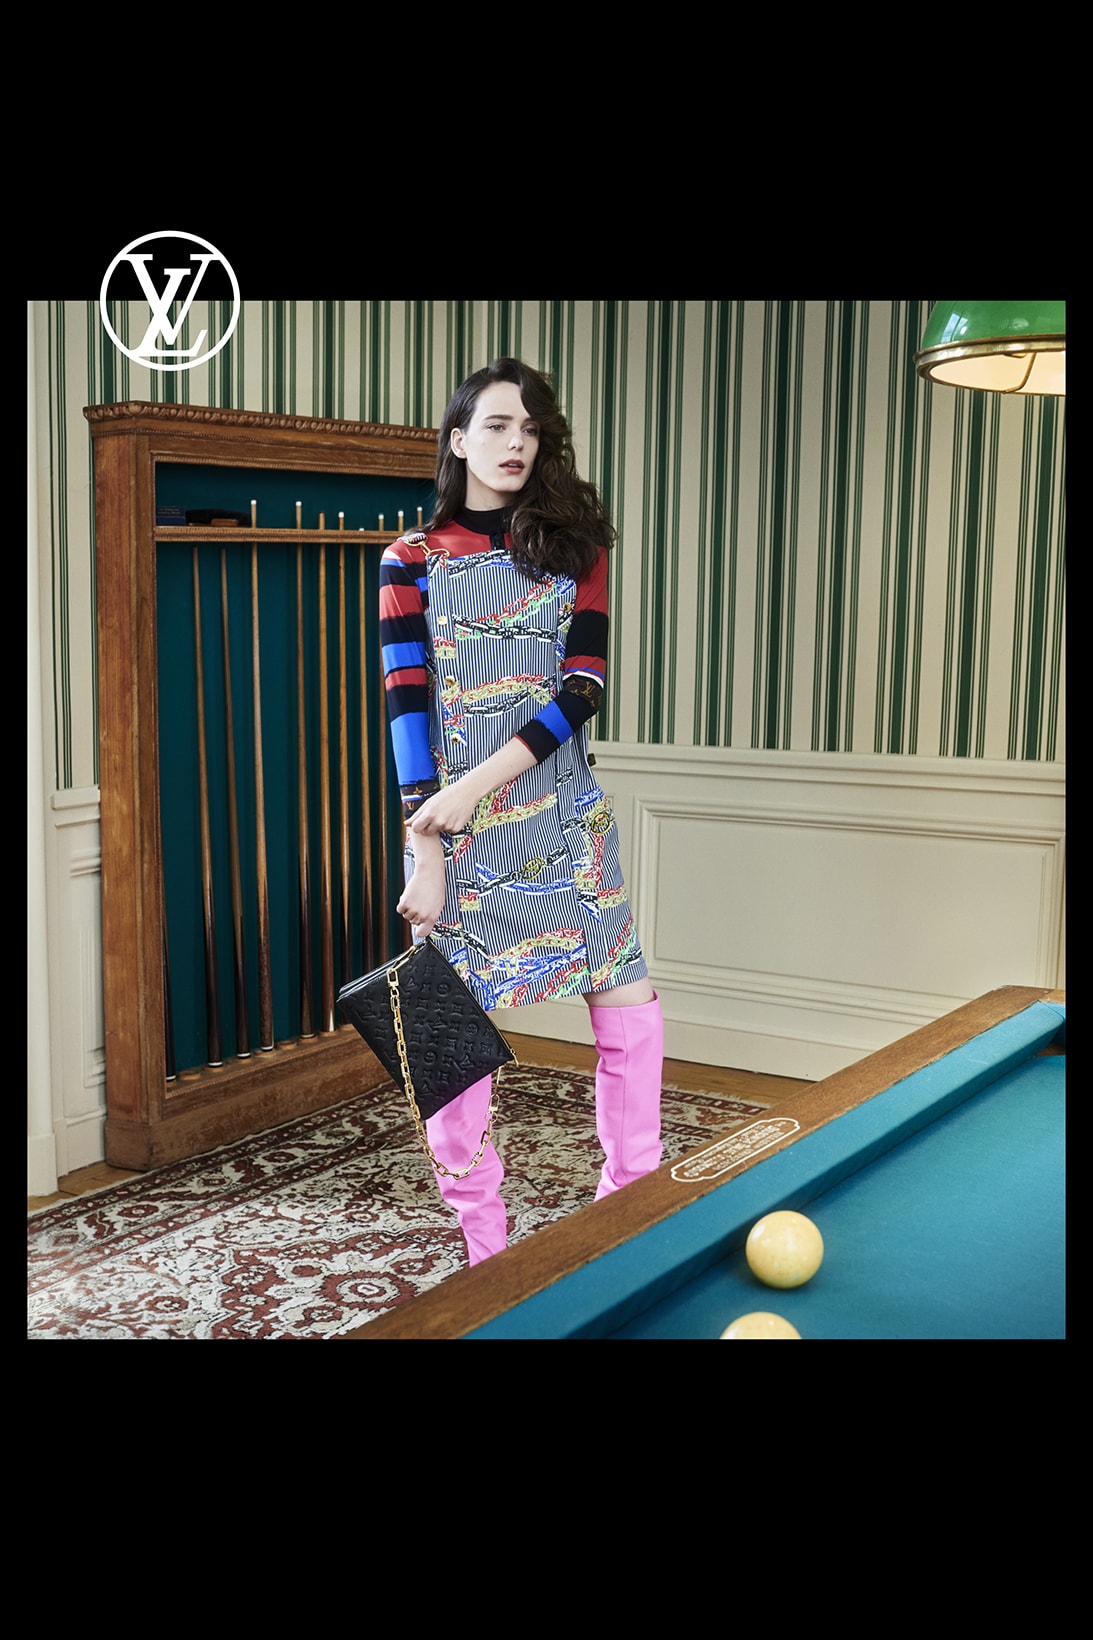 louis vuitton pre fall womens collection nicolas ghesquiere dress long sleeve shirt pink boots black designer bag pool table